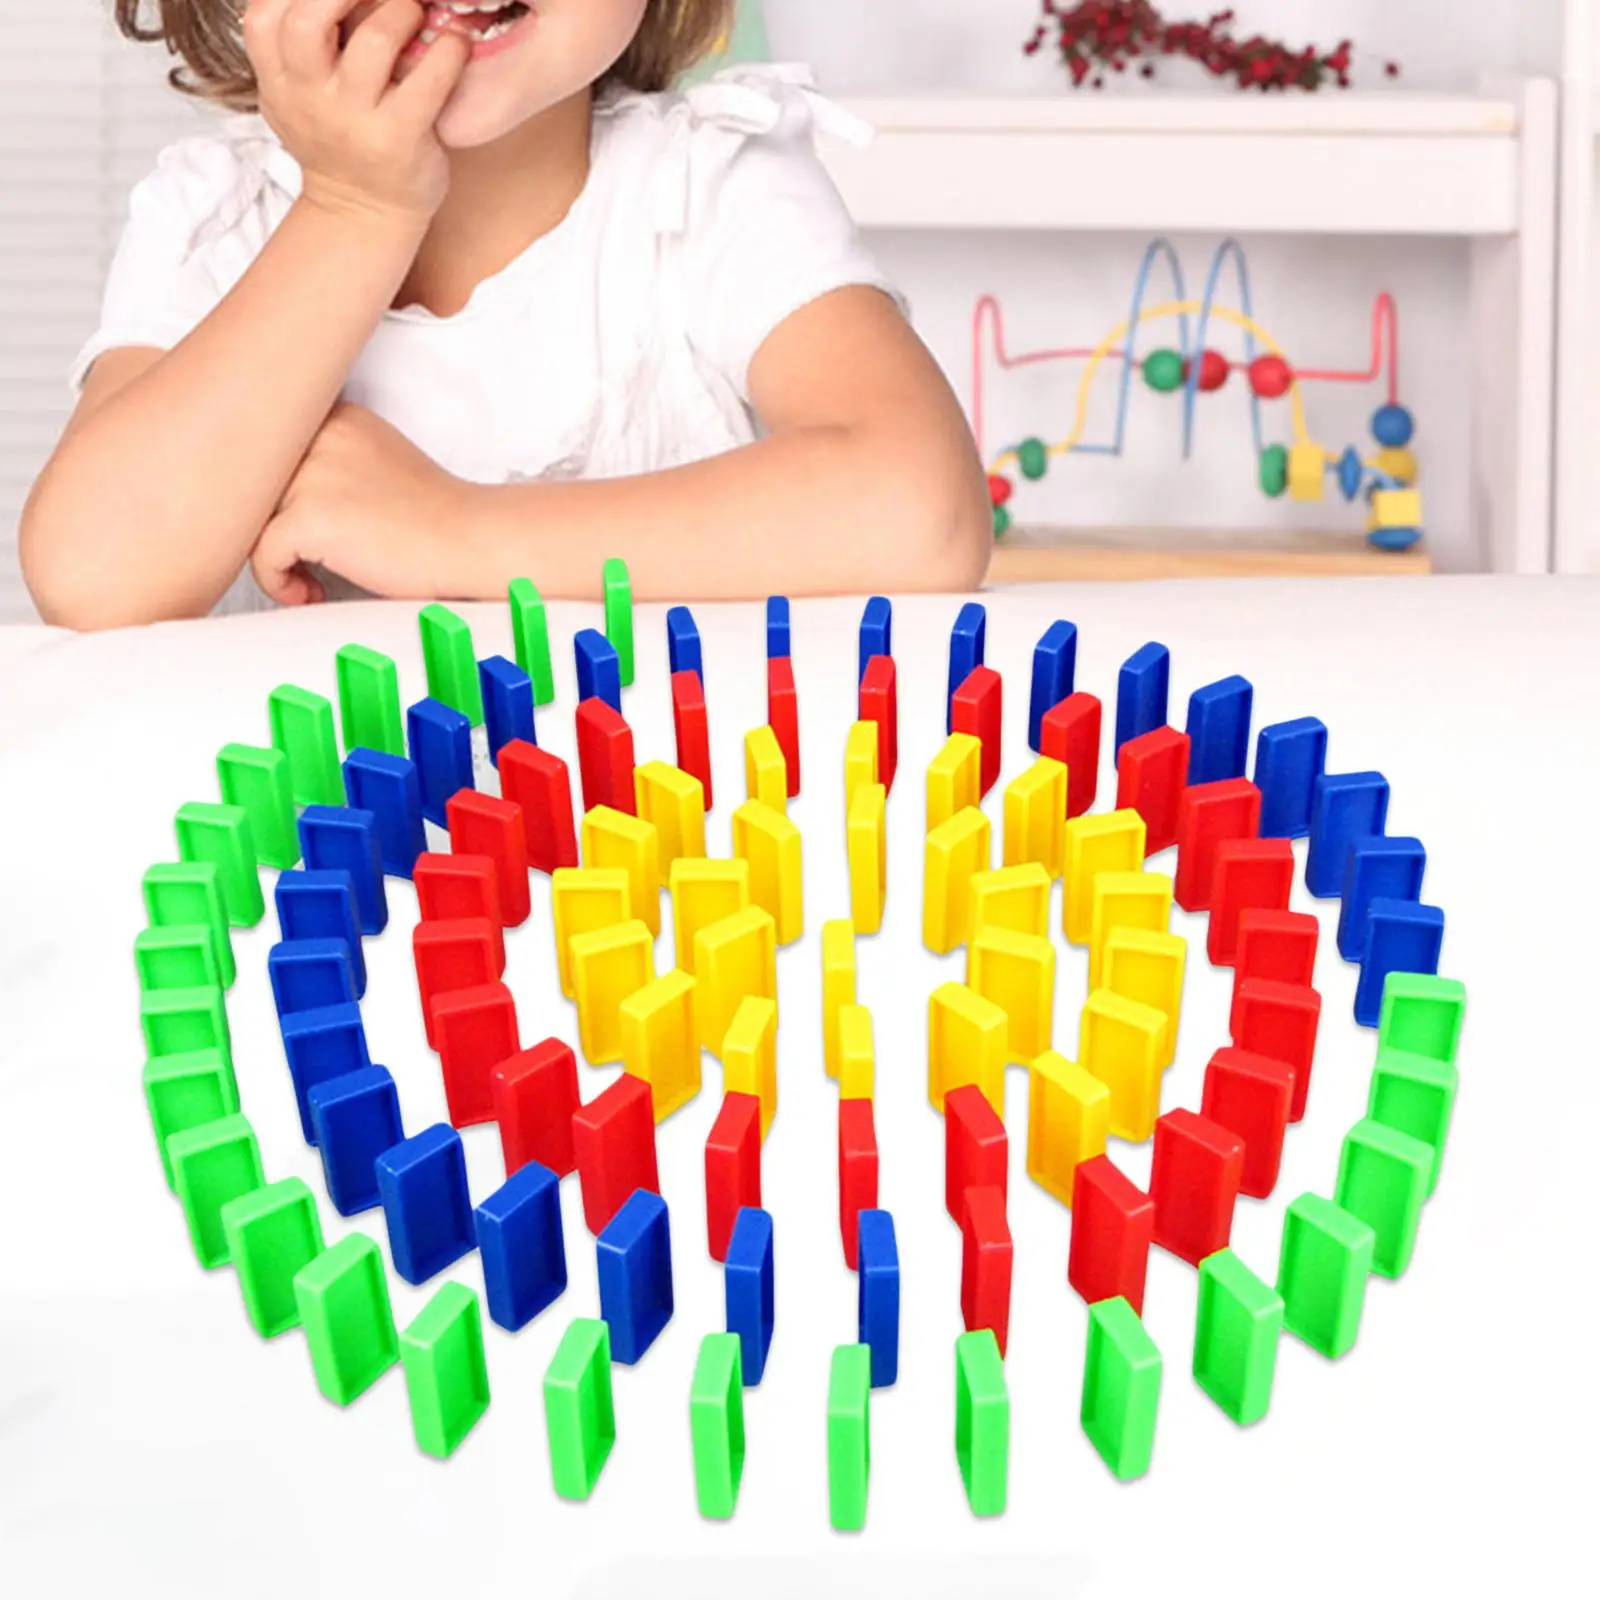 100x Dominoes Train Blocks Set Educational Play Game Stacking Toy Building for Girls Boys Toddler Kids Children Birthday Gifts